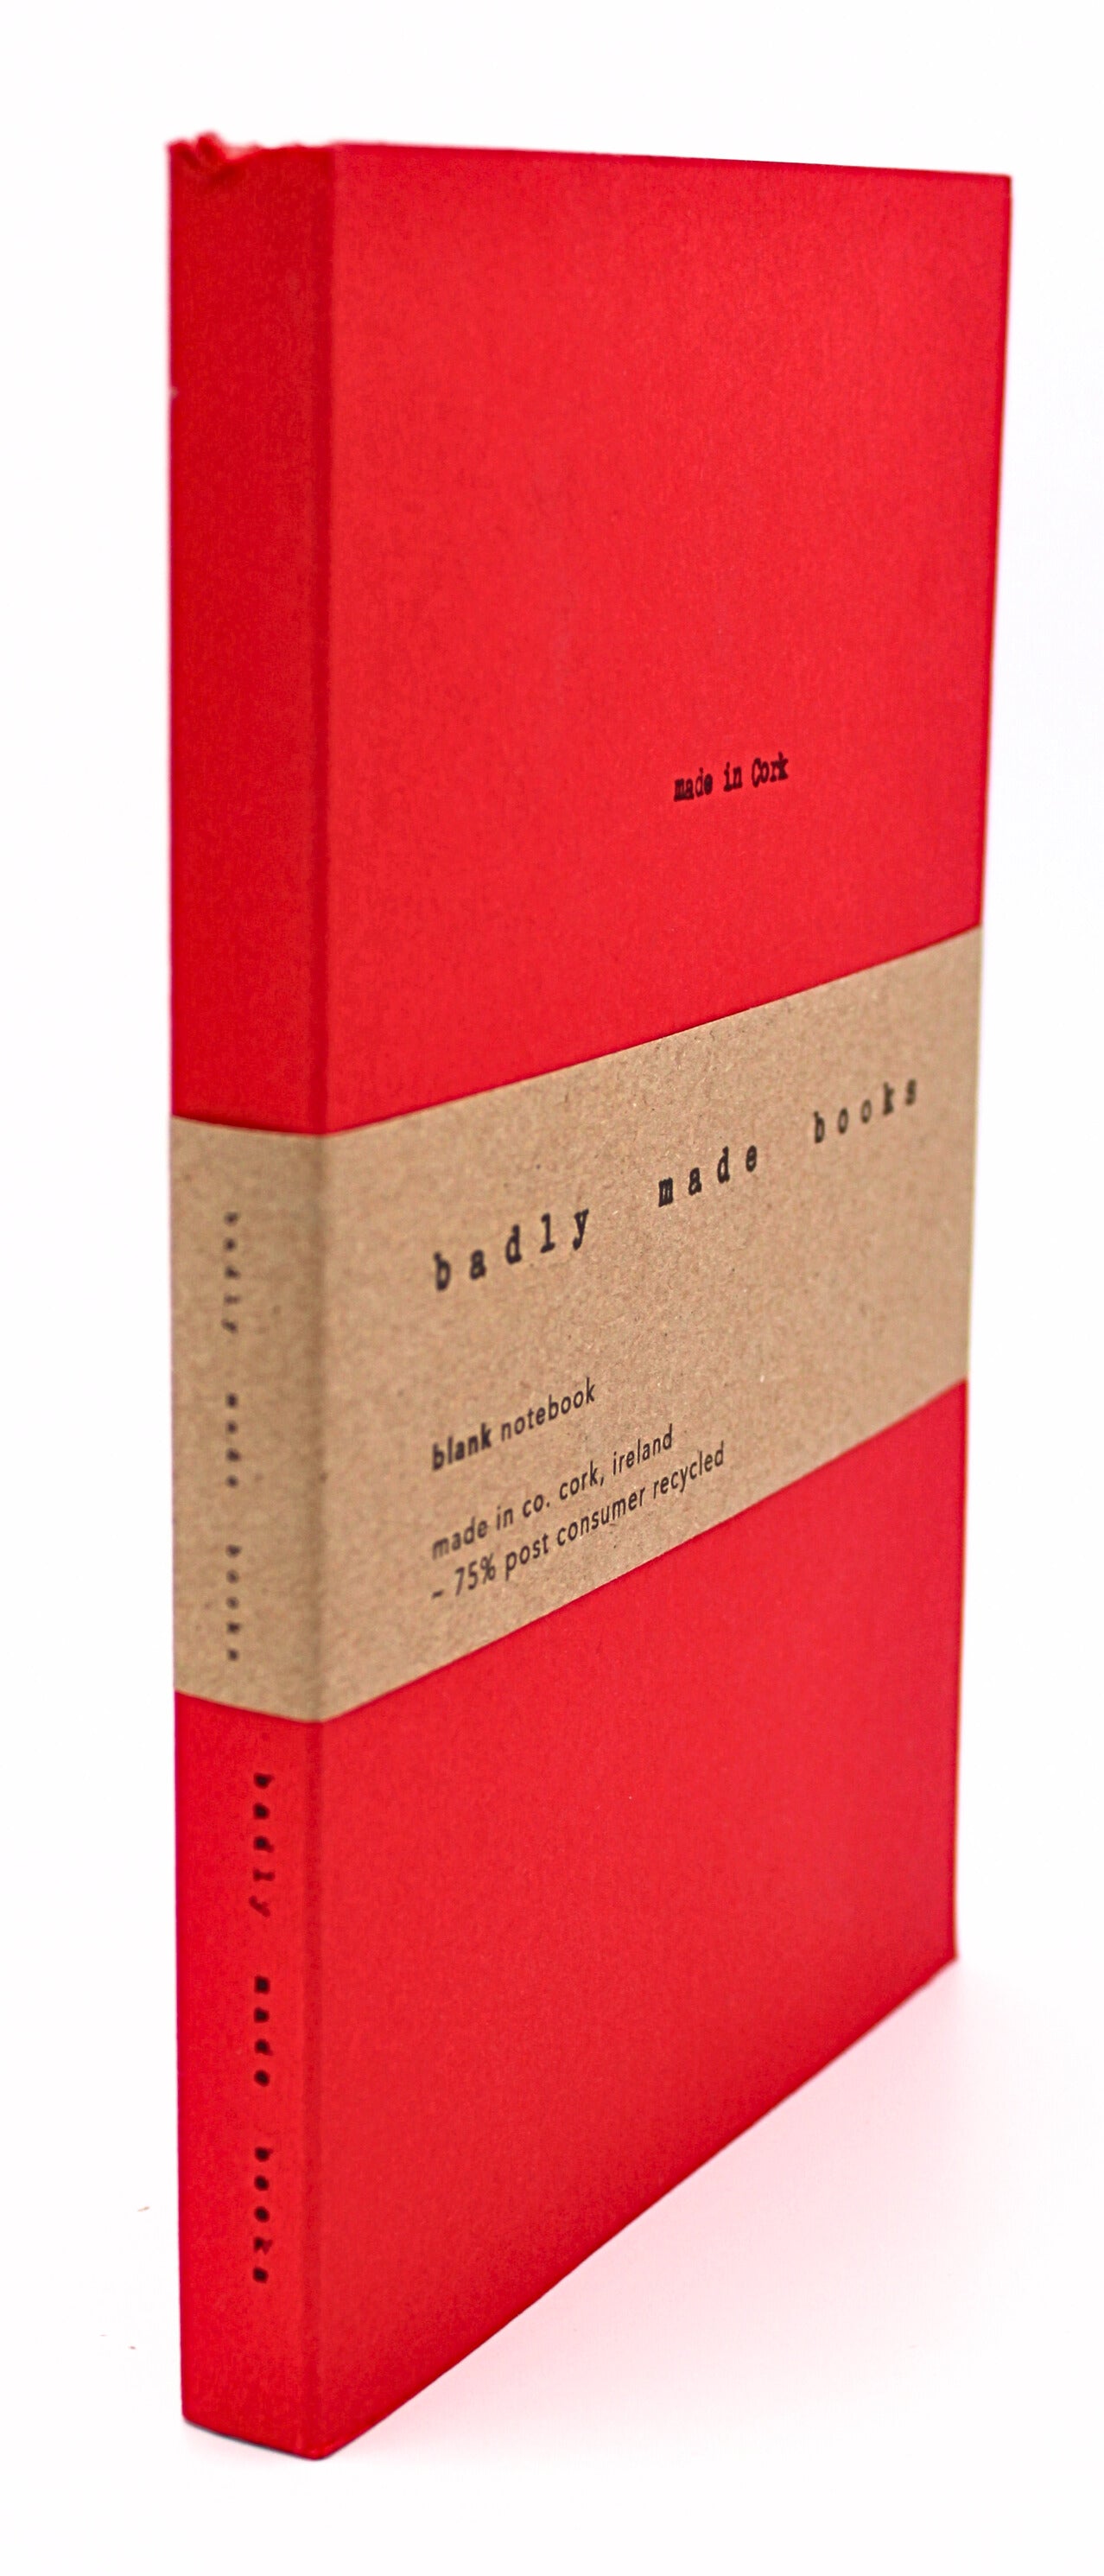 Side View of Badly Made Books A5 Red Notebook with Blank Pages